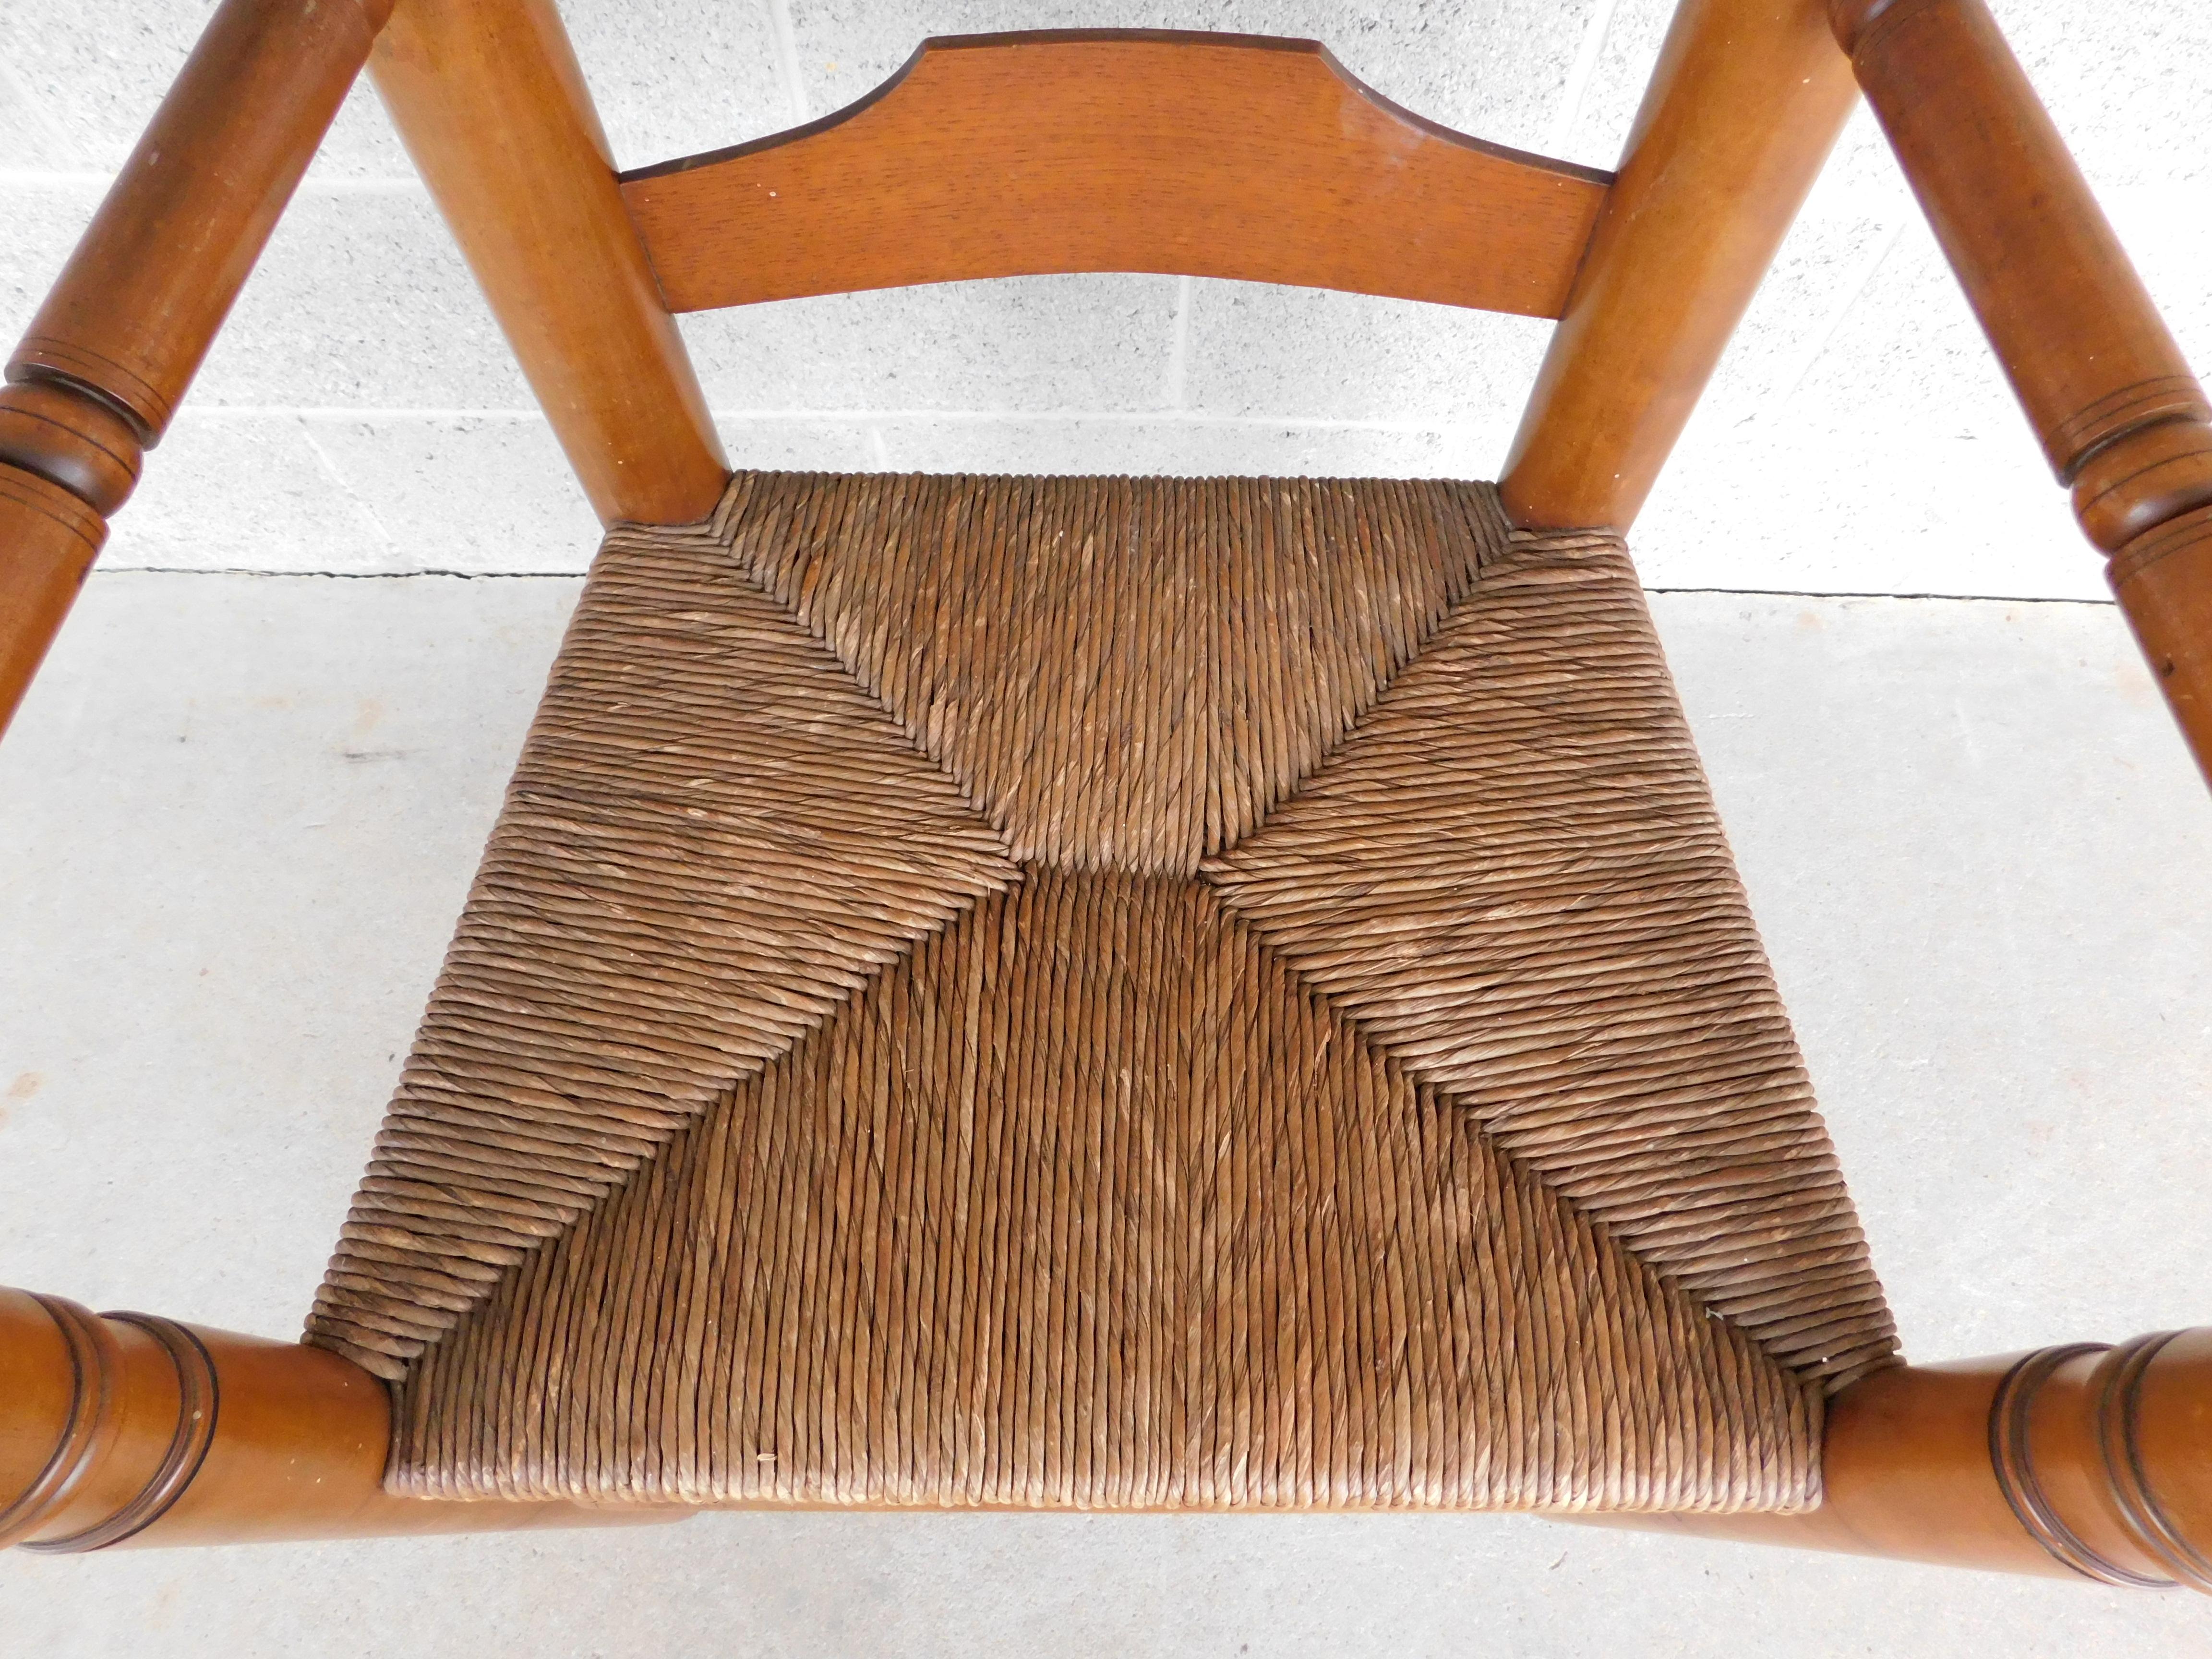 Hand-Crafted Wallace Nutting #393 Pilgrim Ladder Back Arm Chair For Sale